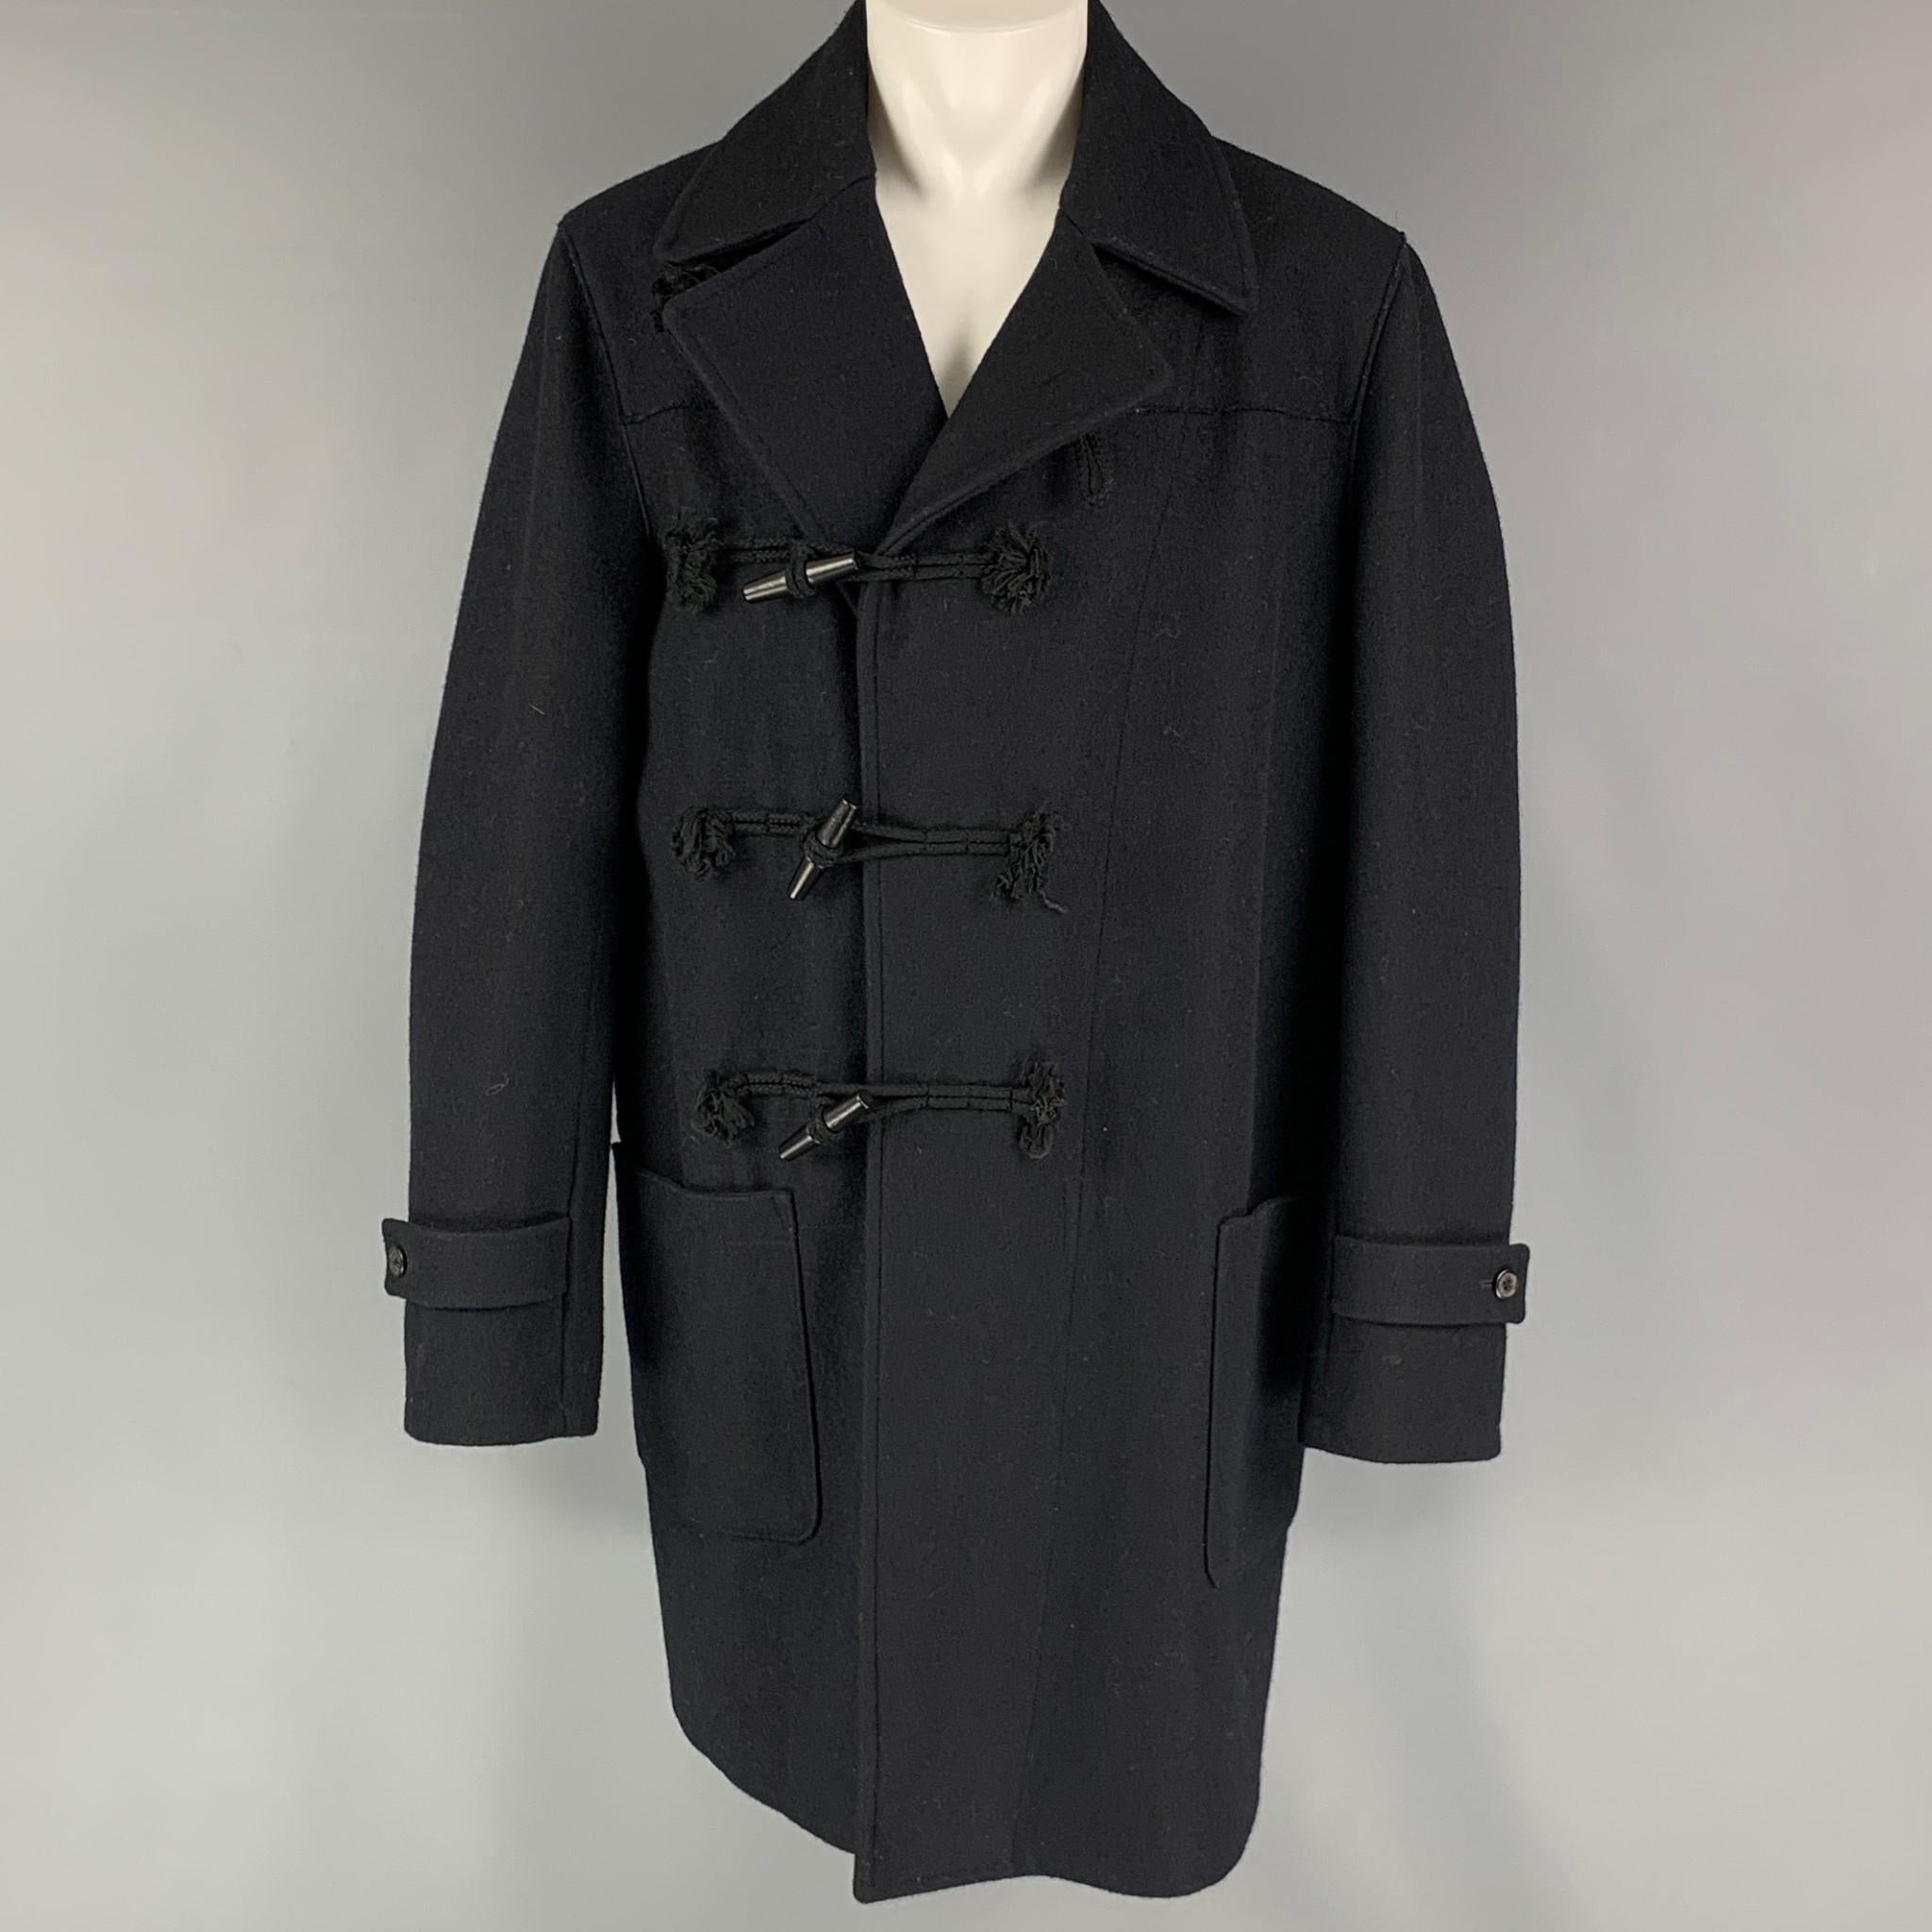 MARTIN MARGIELA REPLICA 70's coat comes in a navy wool fleece material featuring a patch pockets, and a toggle closure. Made in Italy.

Very Good Pre-Owned Condition.
Marked: 14

Measurements:

Shoulder: 19.5 in.
Chest: 50 in.
Sleeve: 28 in.
Length: